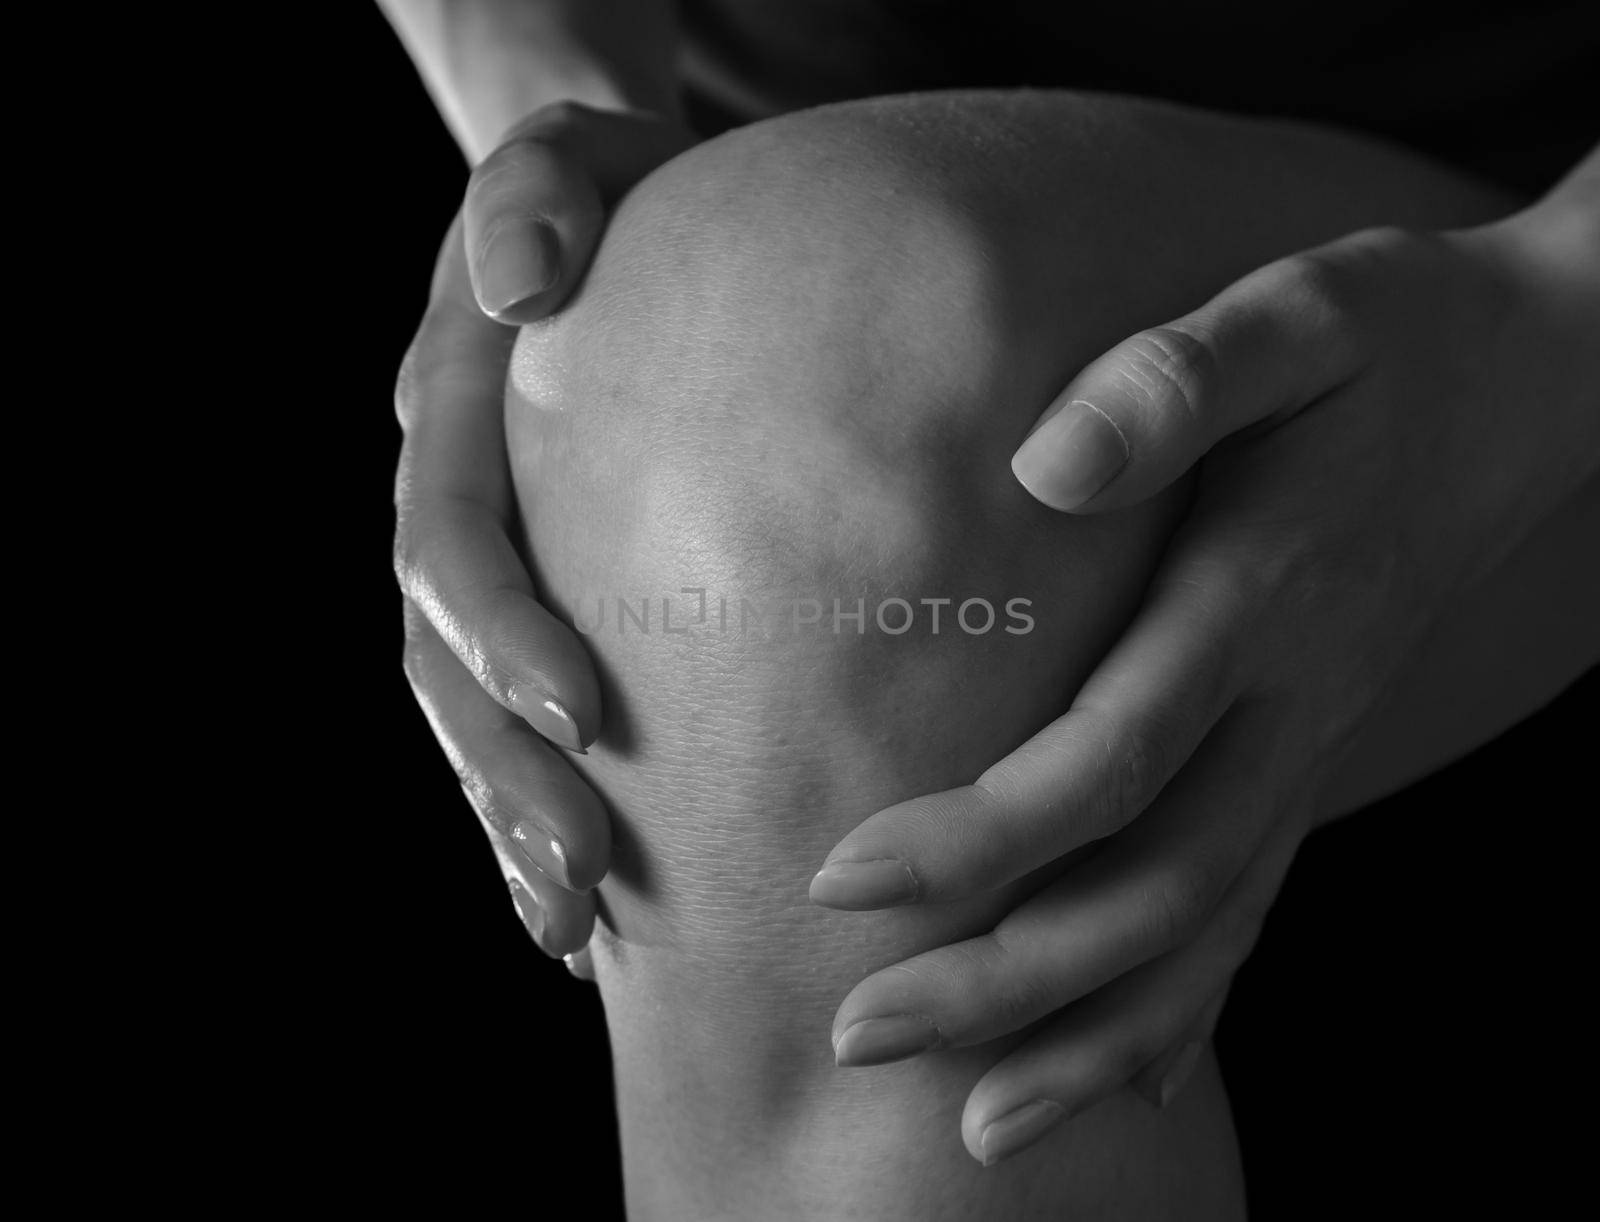 Woman holds her knee, pain in the knee joint, monochrome image